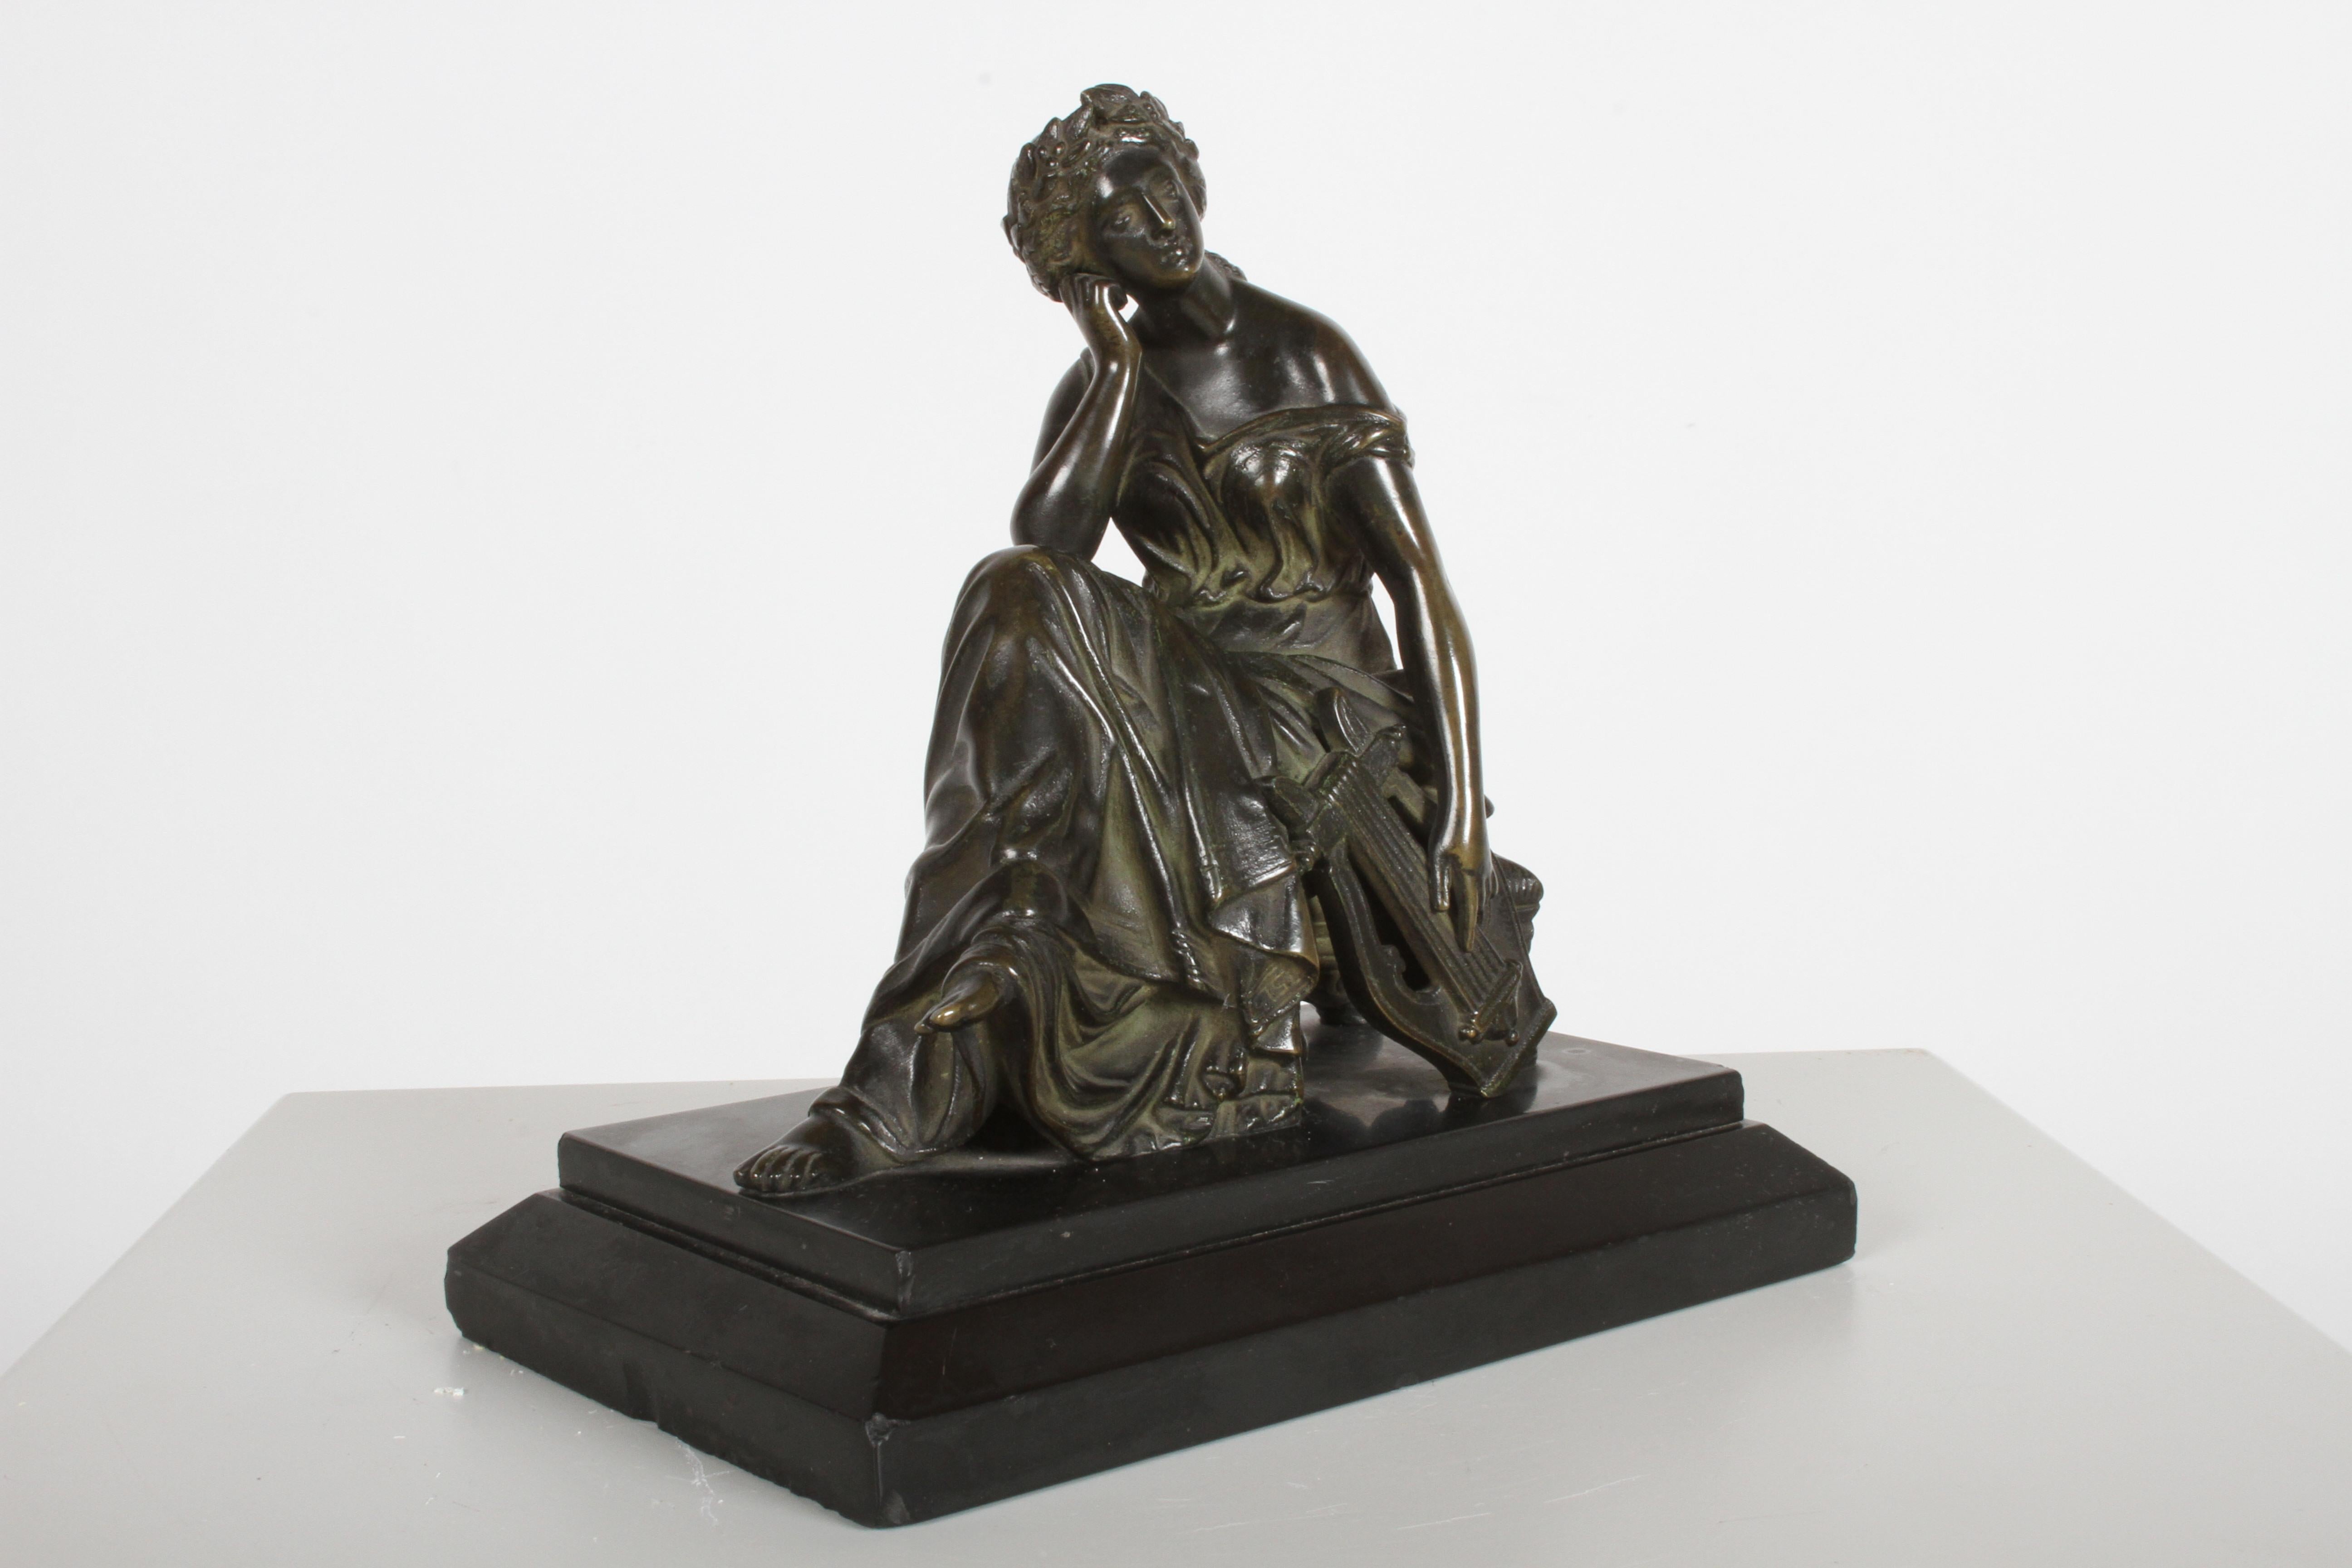 Neoclassical bronze by Louis Alfred Habert (French, 1824-1893) late 19th century figure of the muse: Terpsichore. Classical female seated, holding a Lyre and crowned with flowers on black marble base. Signed on the lyre 